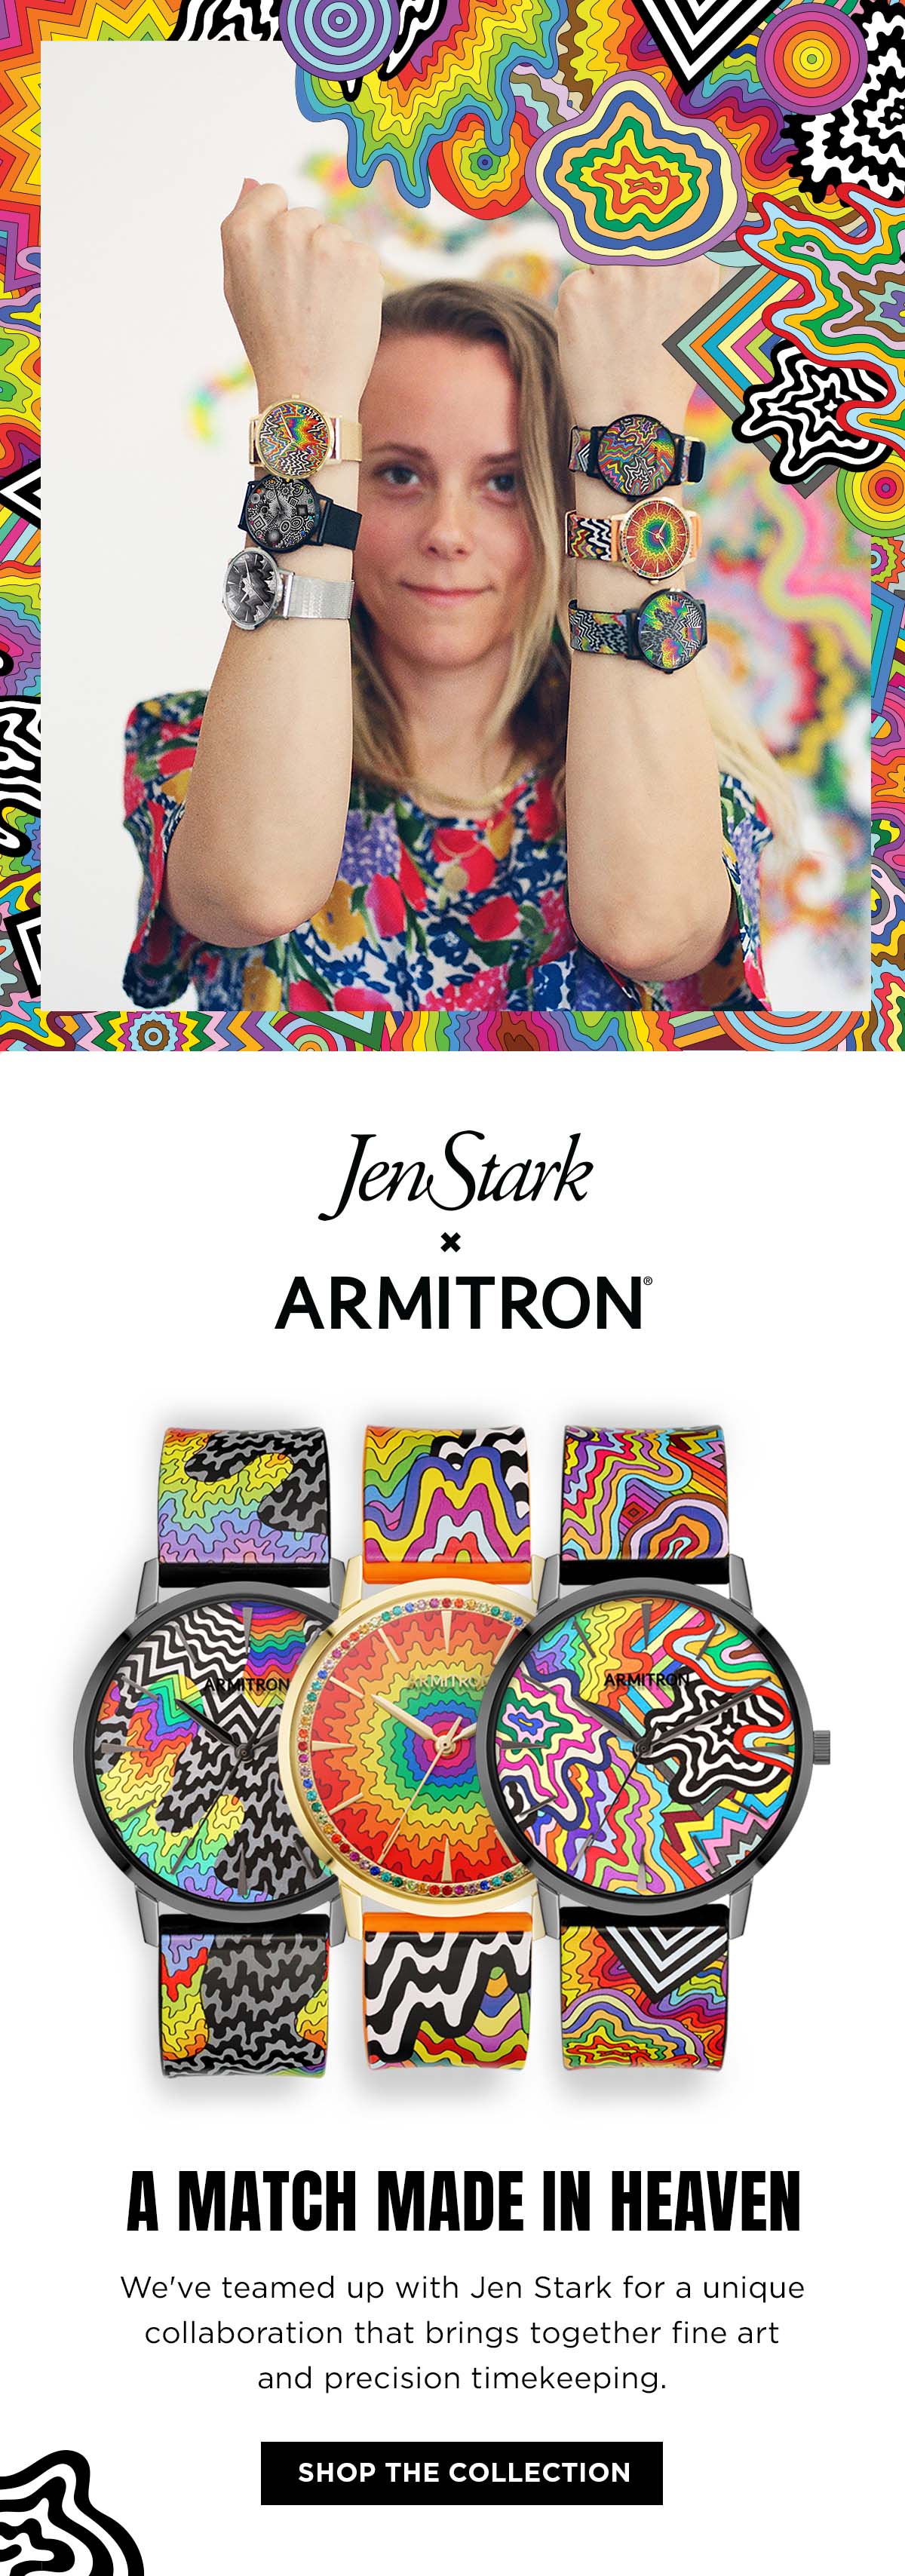 This one-of-a-kind collection features Jen Stark’s artwork, which is inspired by mathematical rigor and sacred geometry, elevating the designs beyond pure aestheticism. Form, function and beauty combine to create expressive pieces that showcase depth and individuality. The Jen Stark x Armitron collaboration offers a series of quality timepieces that empower wearers to express their unique perspectives.